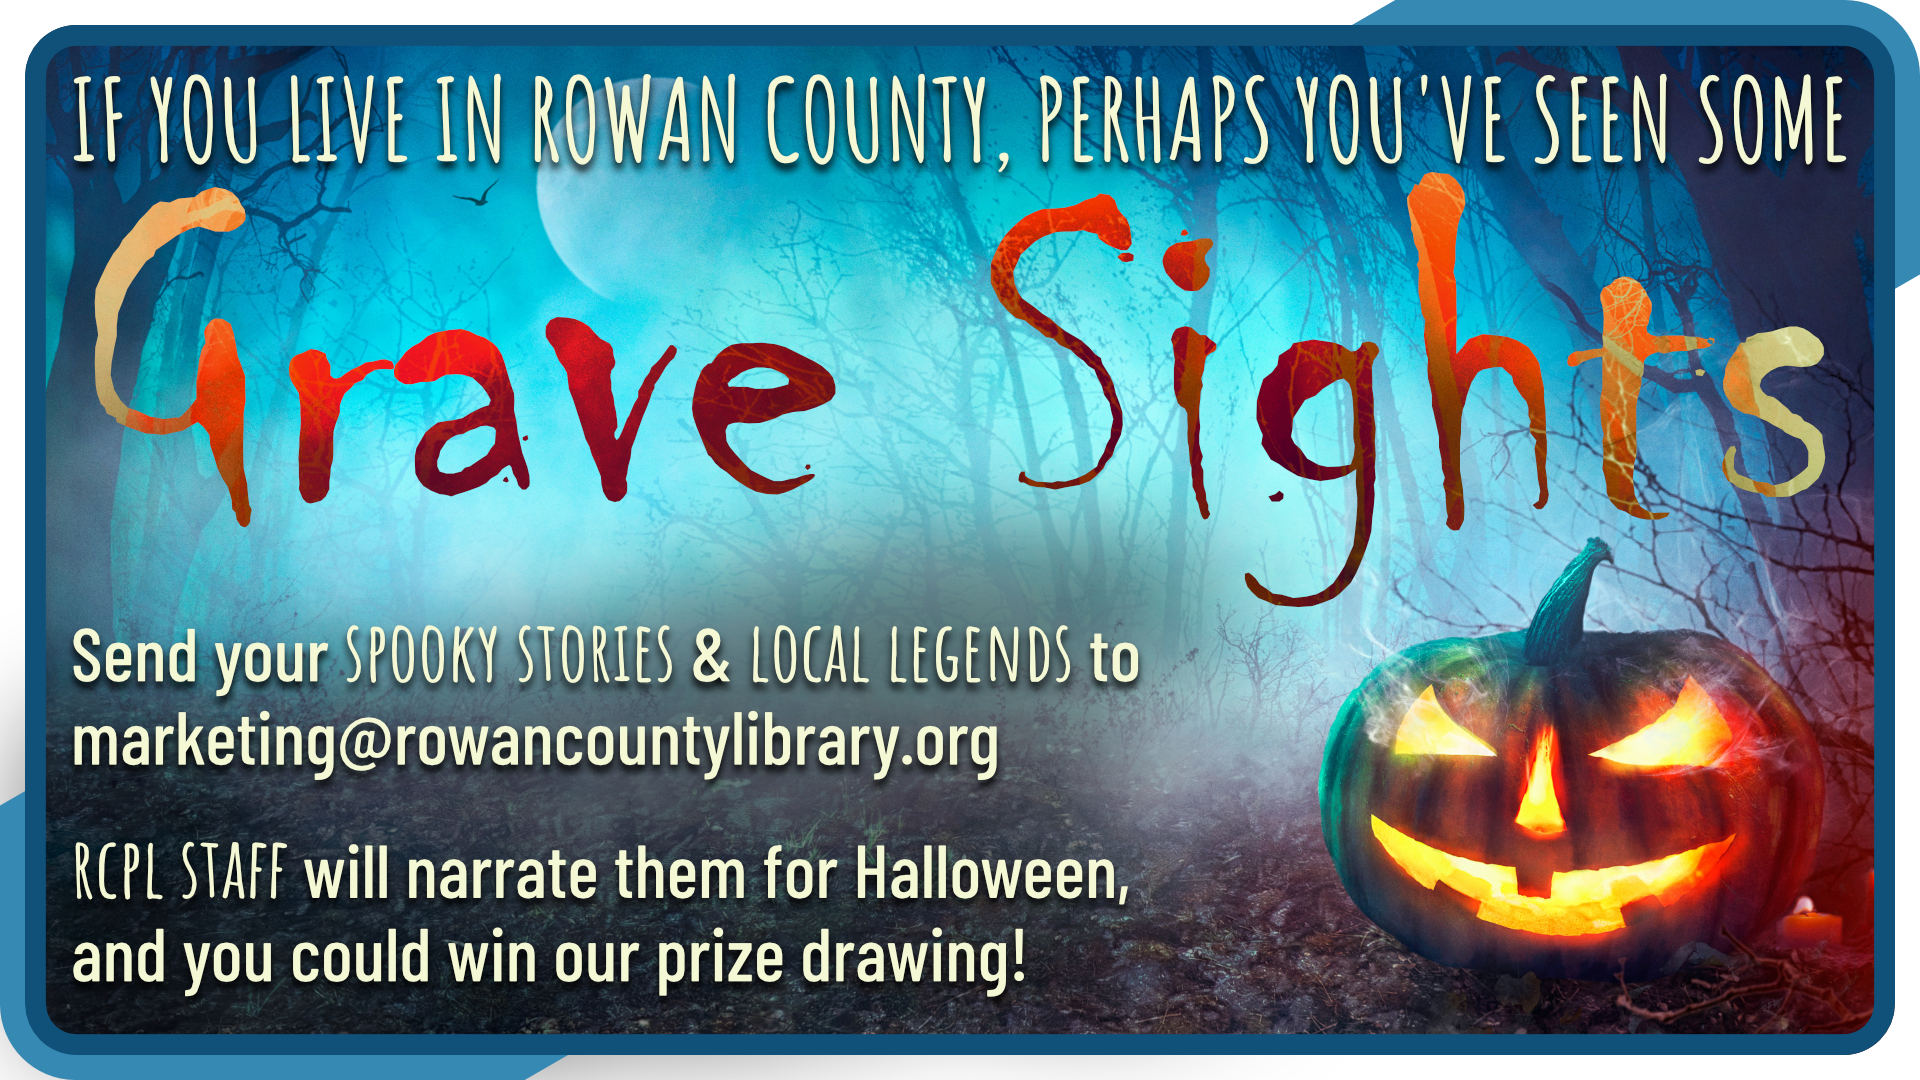 Grave Sights, October 1st through 31st, send us your spooky stories and have us narrate them to enter our prize drawing